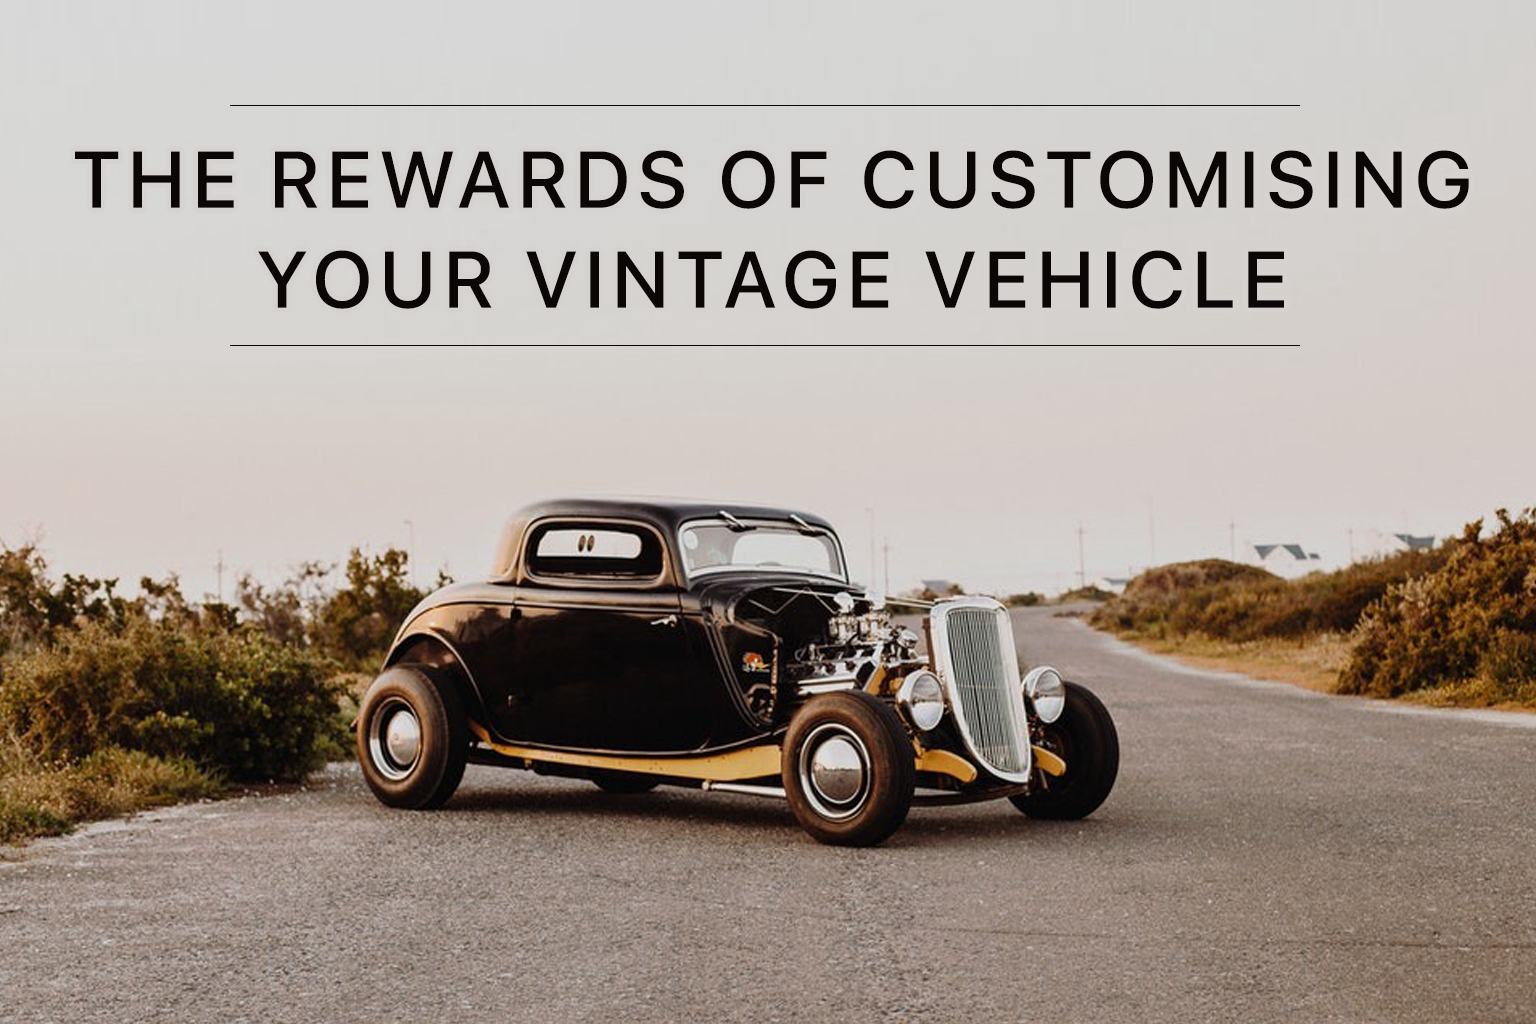 The Rewards of Customising Your Vintage Vehicle